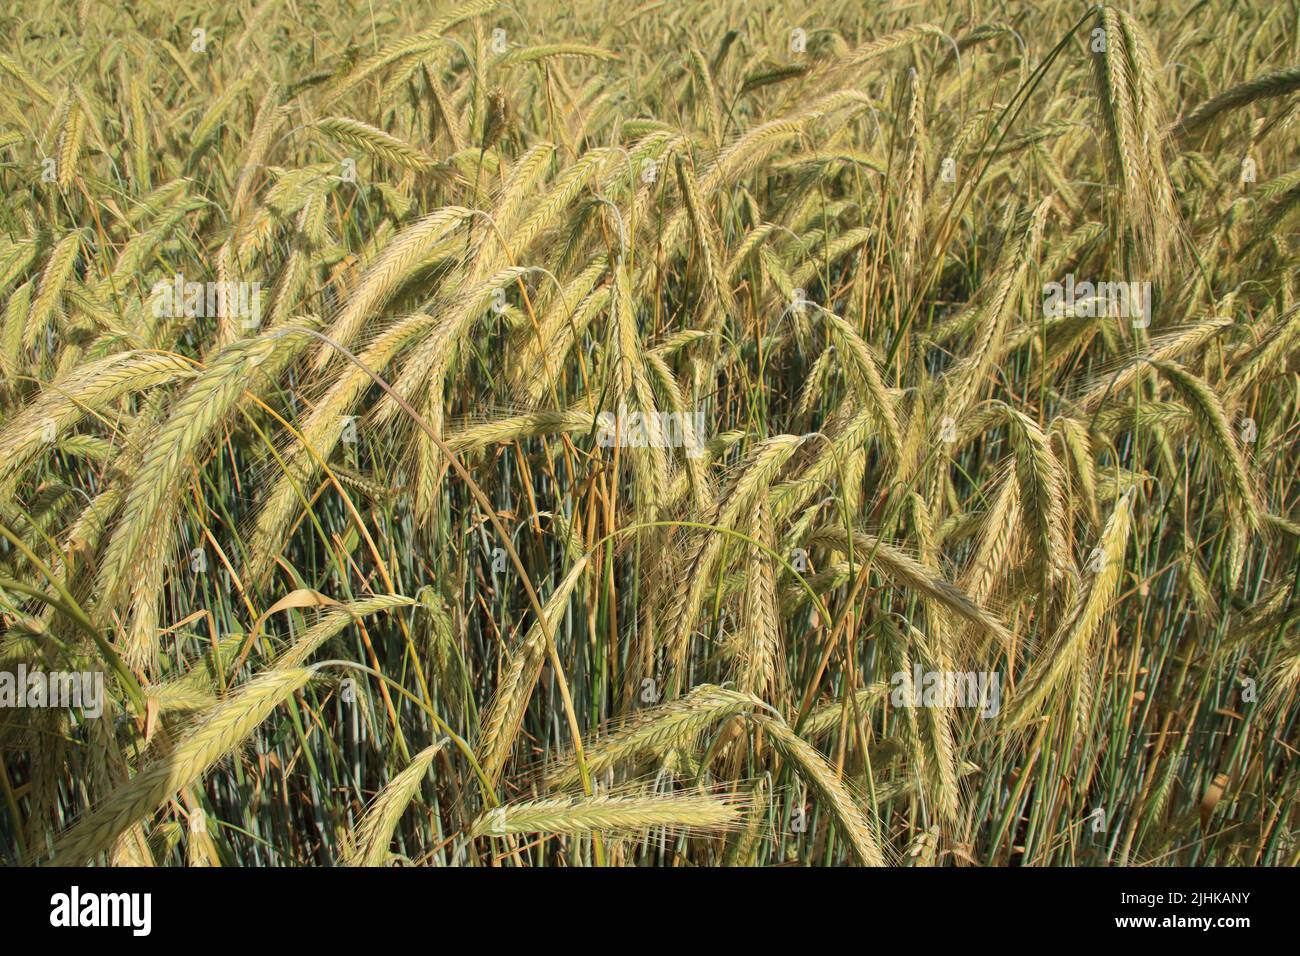 View of a grain field in summer Stock Photo